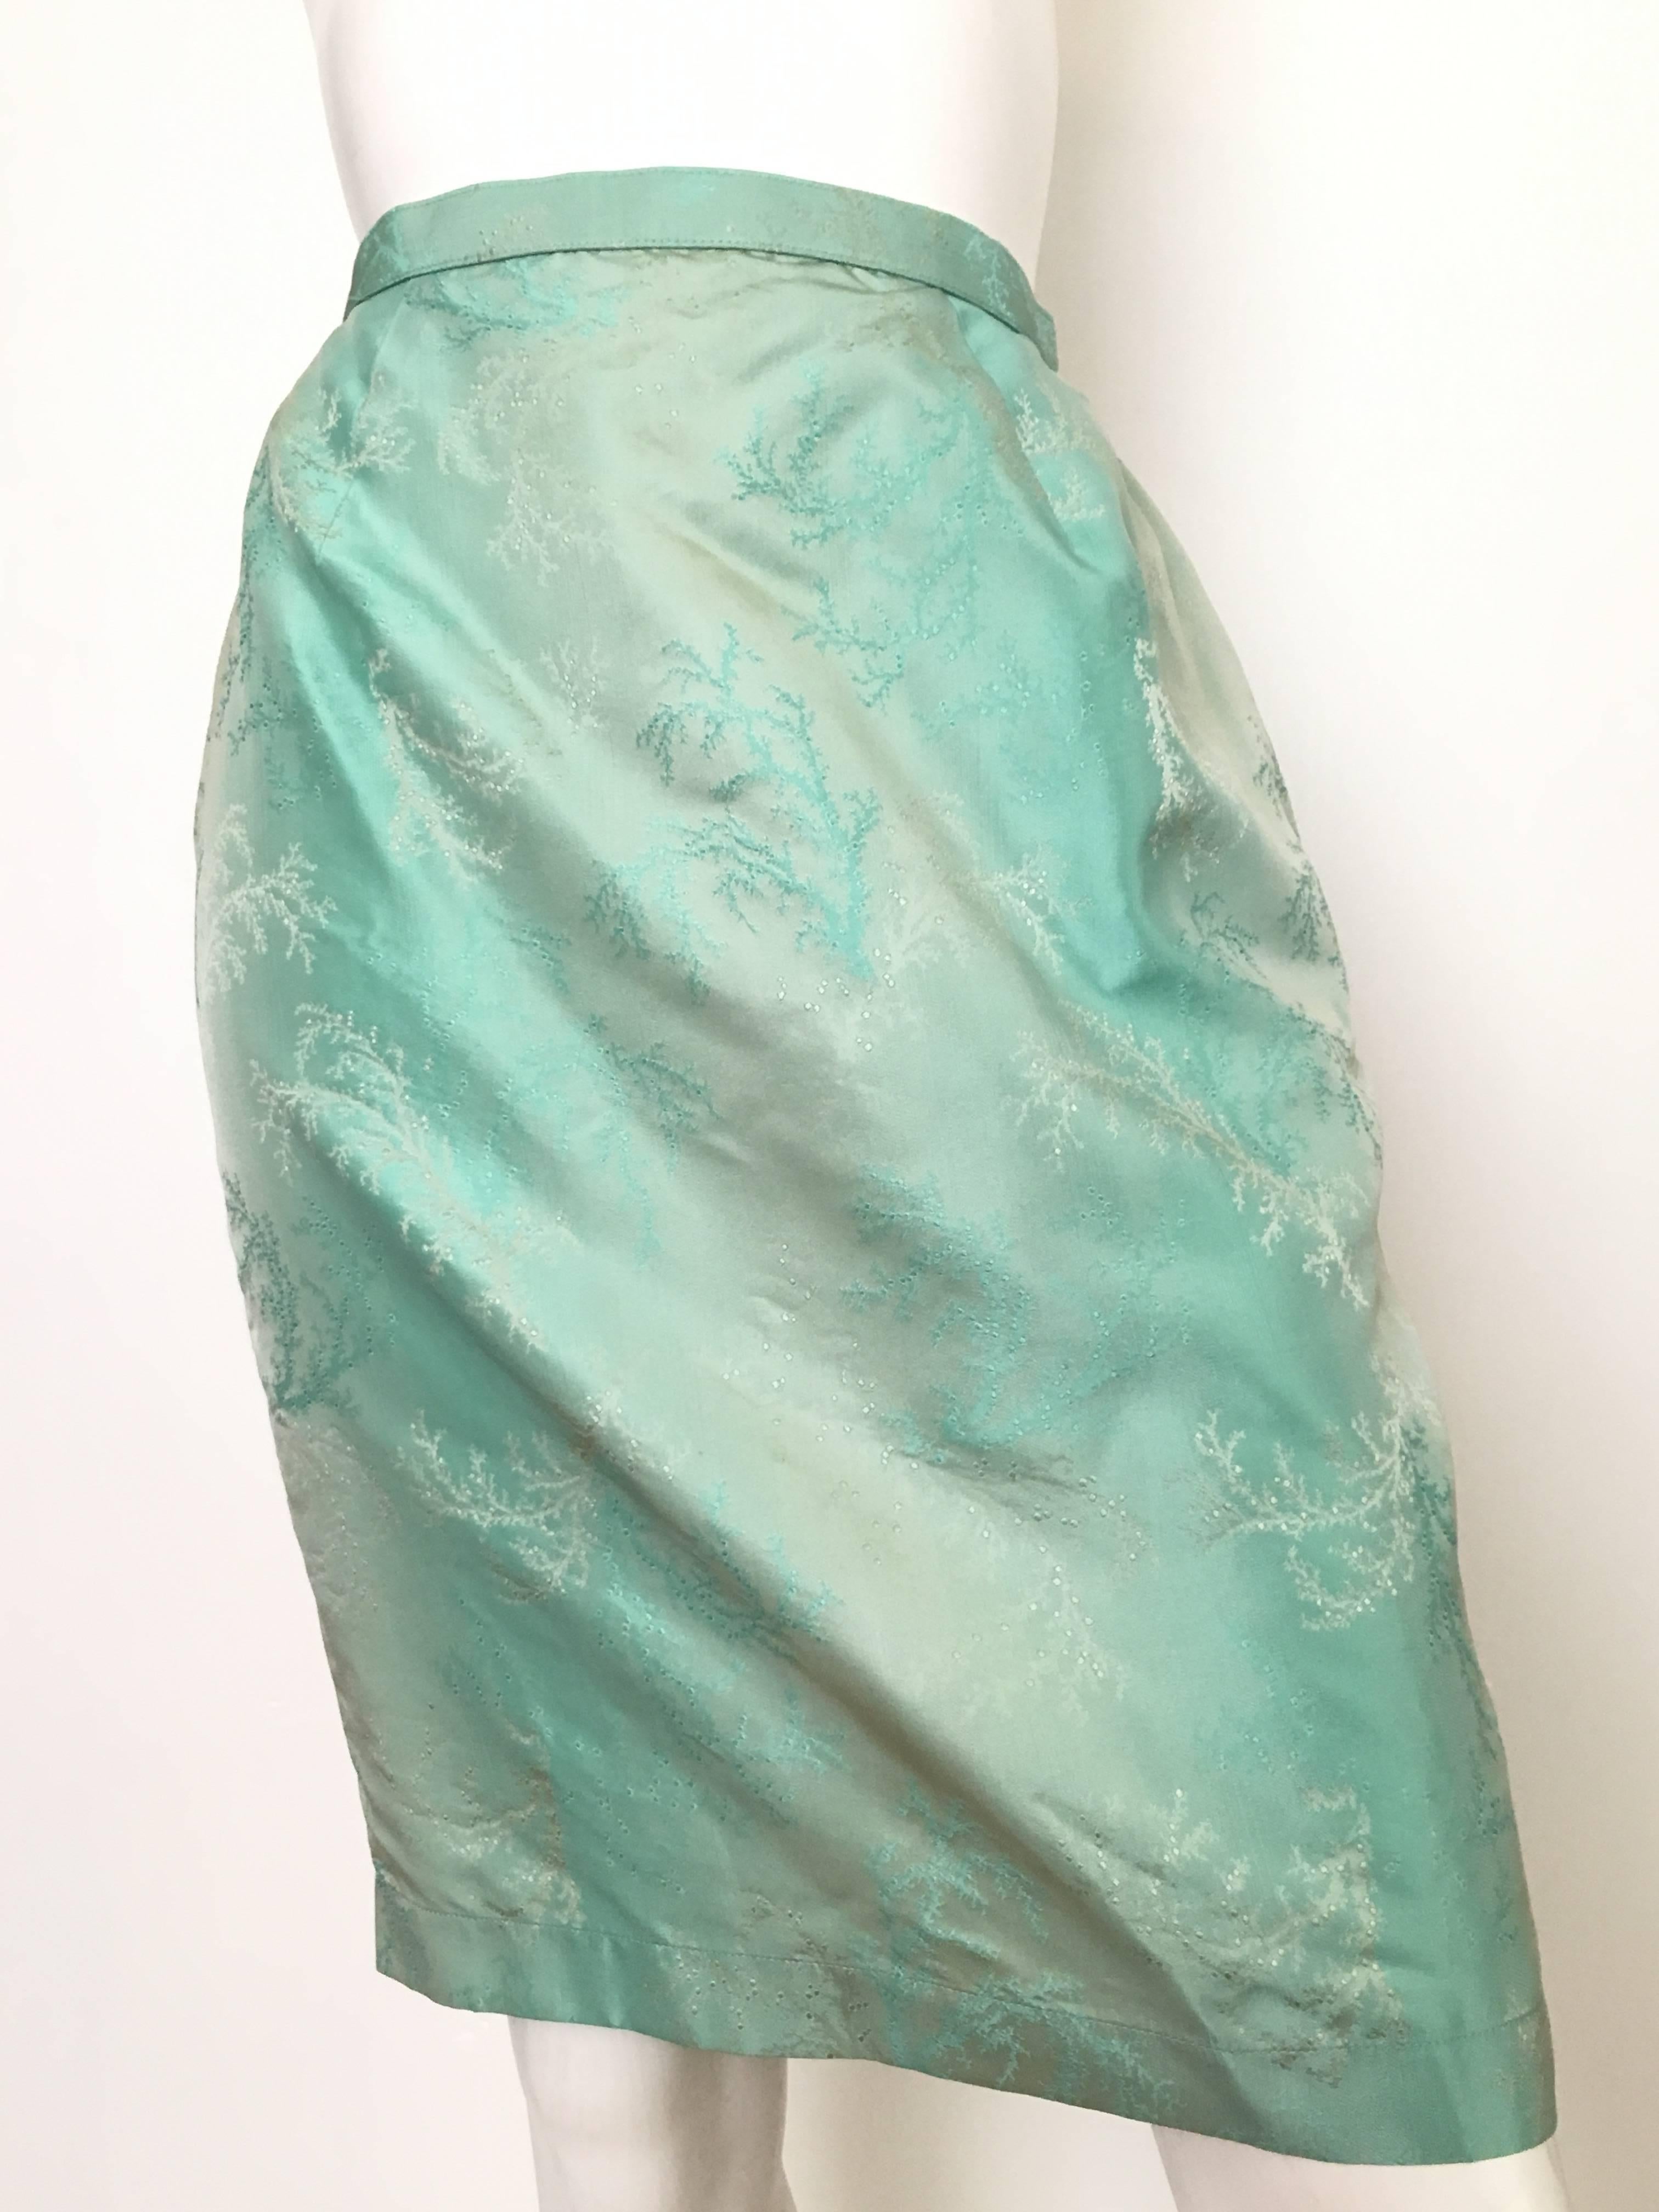 Thierry Mugler 1980s iridescent aqua sexy skirt is a French size 40 and fits like an USA size 4/6.  Ladies please grab your trusted tape measure so you can properly measure your waist & hips to make certain this vintage treasure will fit you to